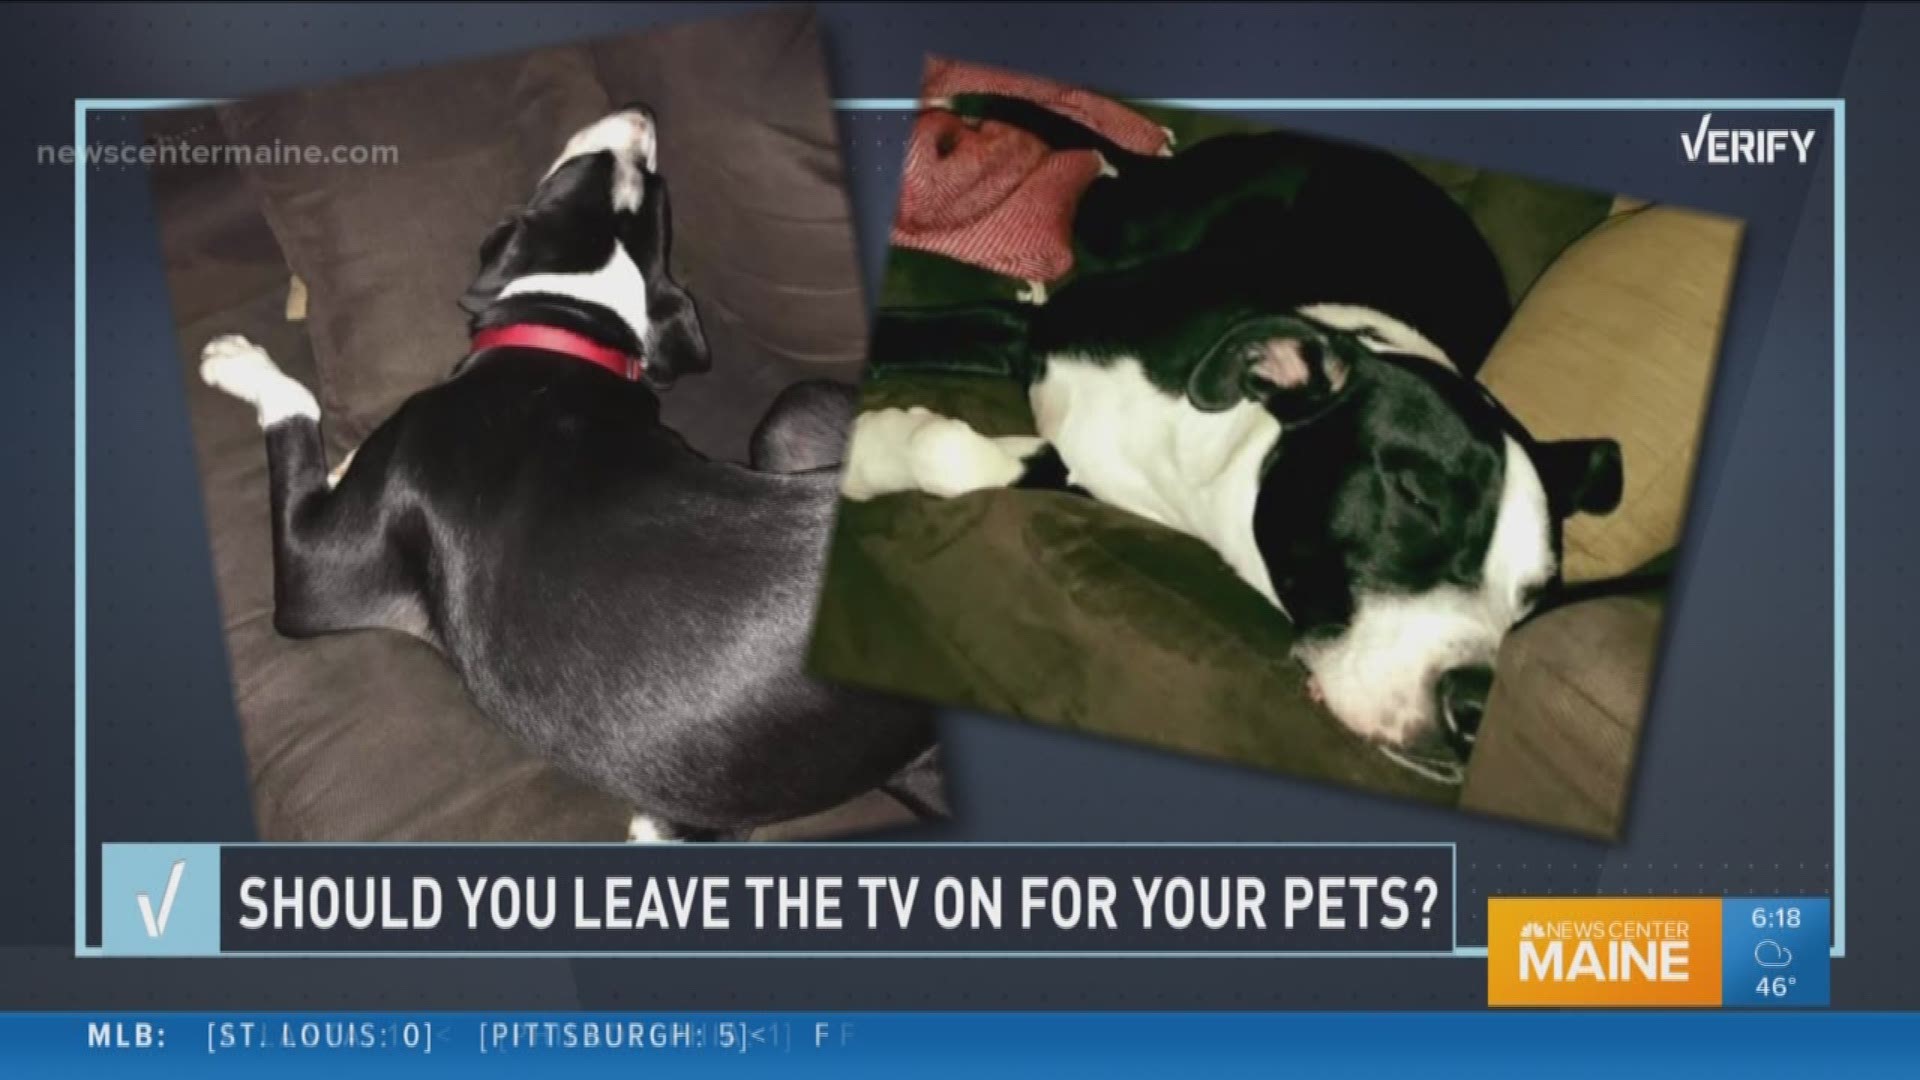 Verify: Should you leave the TV on for your pets?